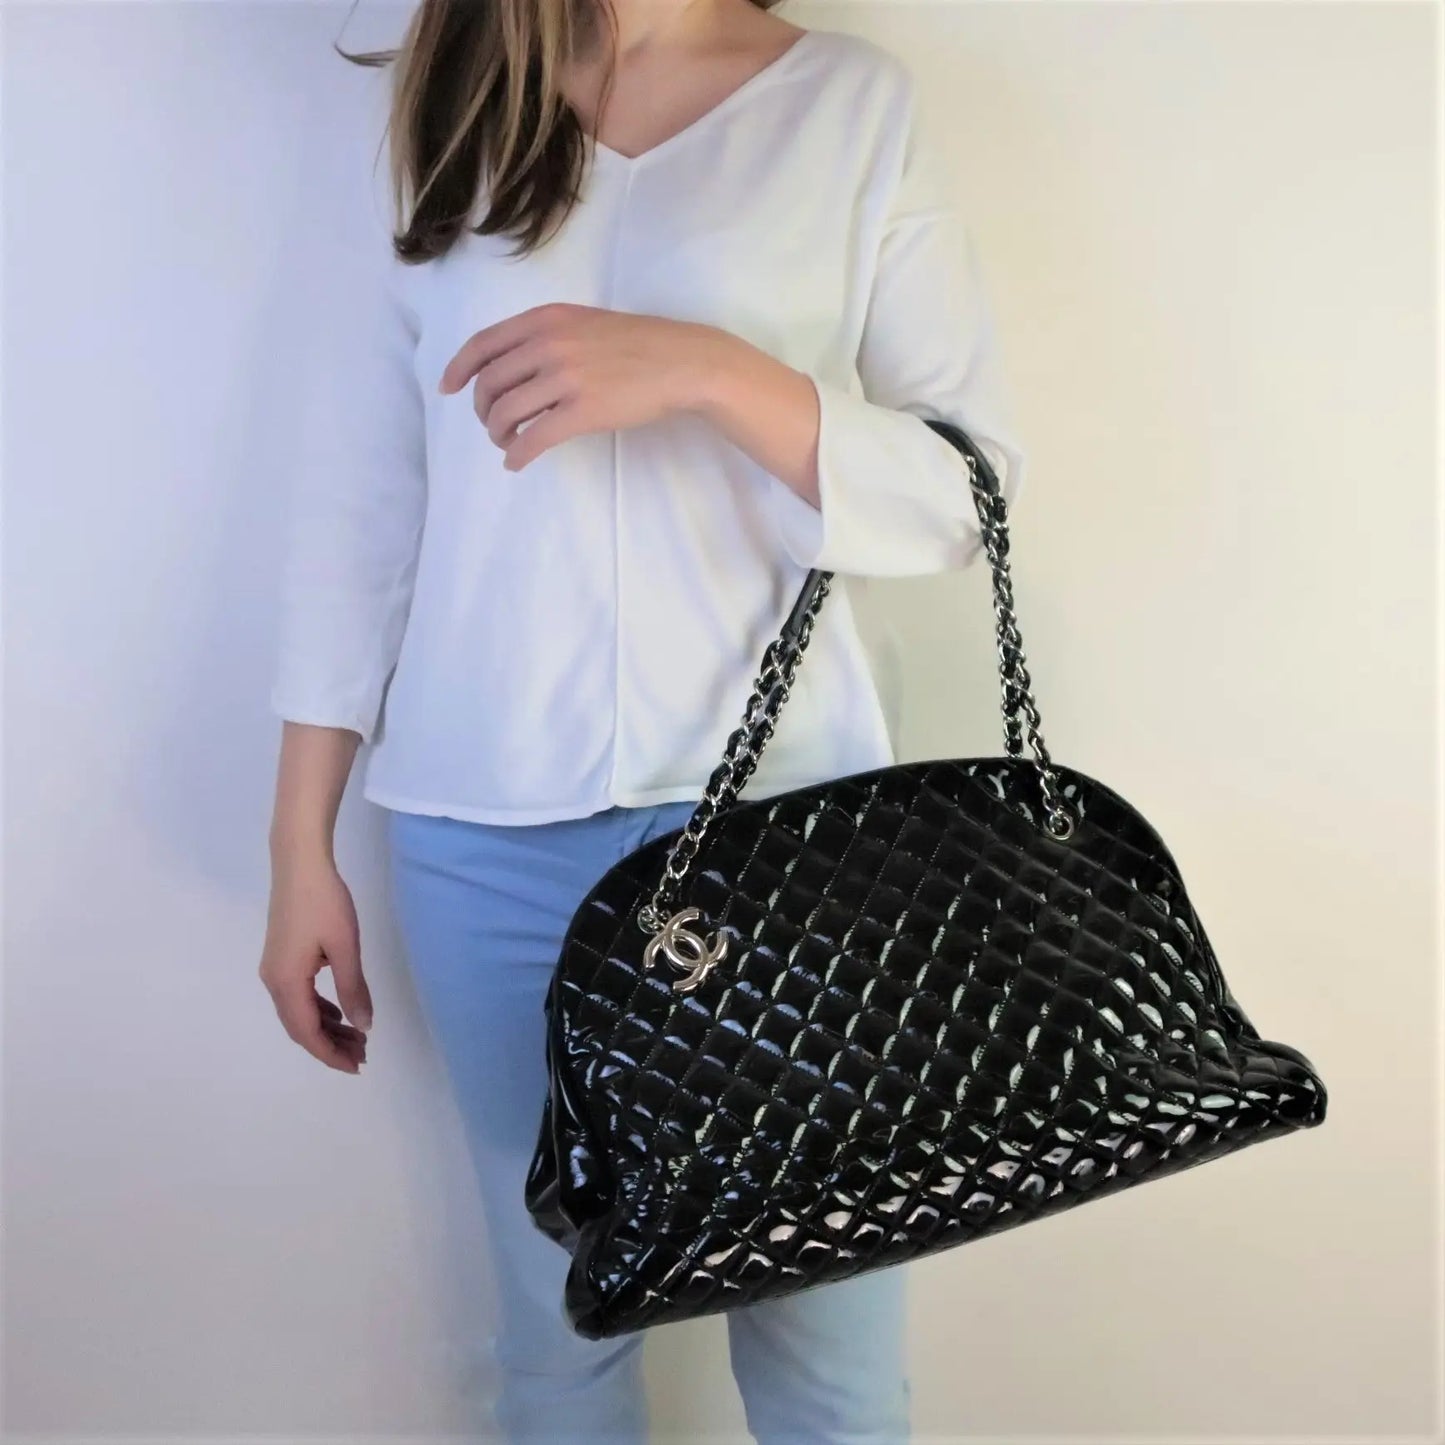 Chanel Black Iridescent Quilted Leather Just Mademoiselle Tote Bag